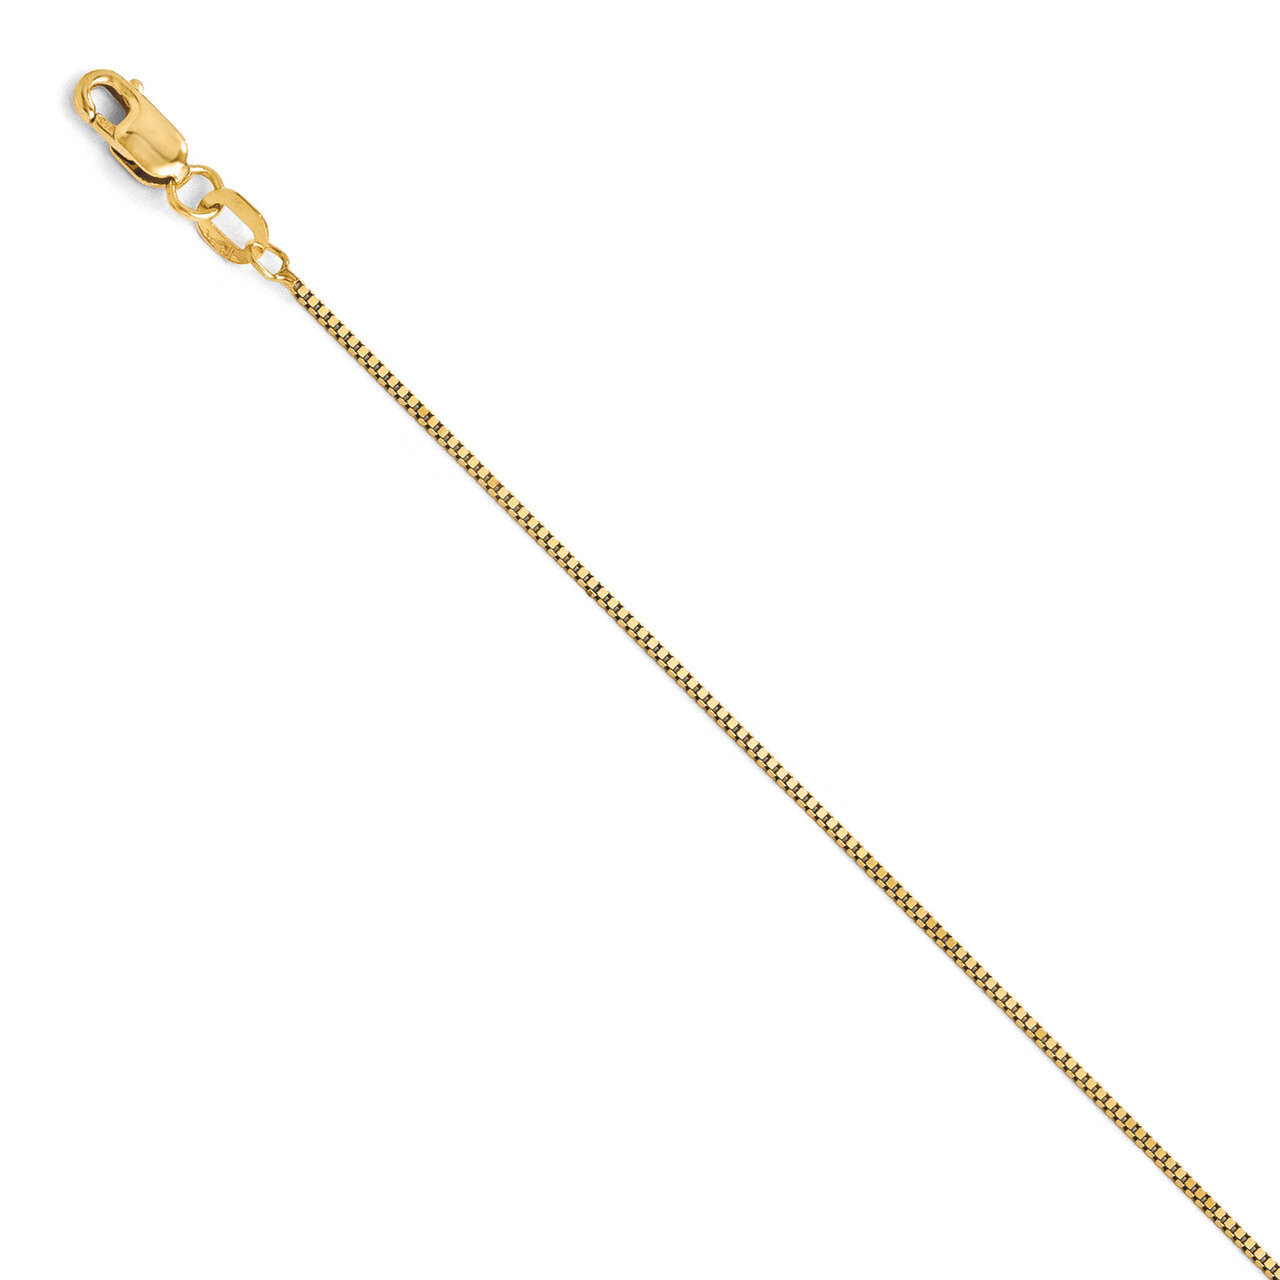 Box Chain with Lobster 16 Inch - 14k Gold HB-1592-16